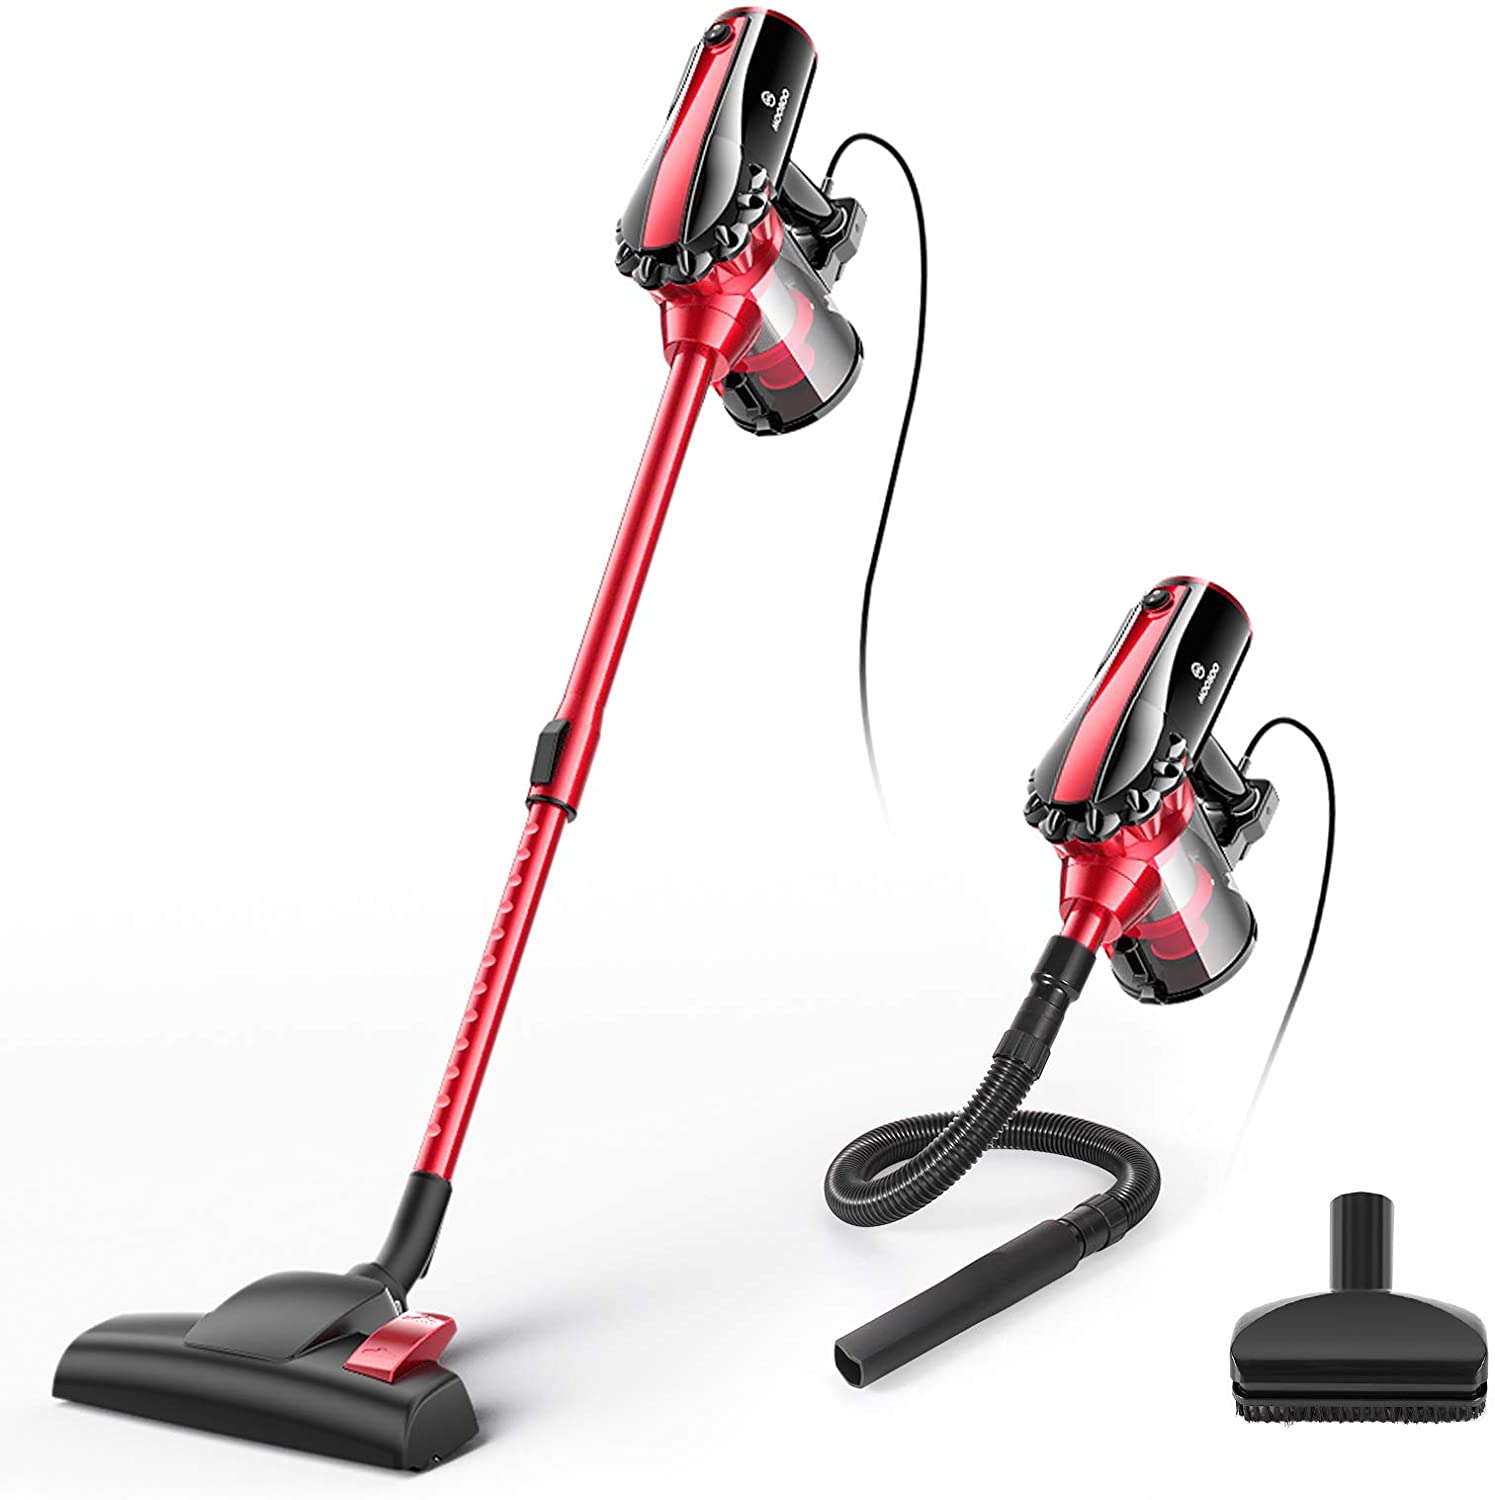 Review of MOOSOO Corded Stick Vacuum for Hard Floor with HEPA Filters,Hose, D600